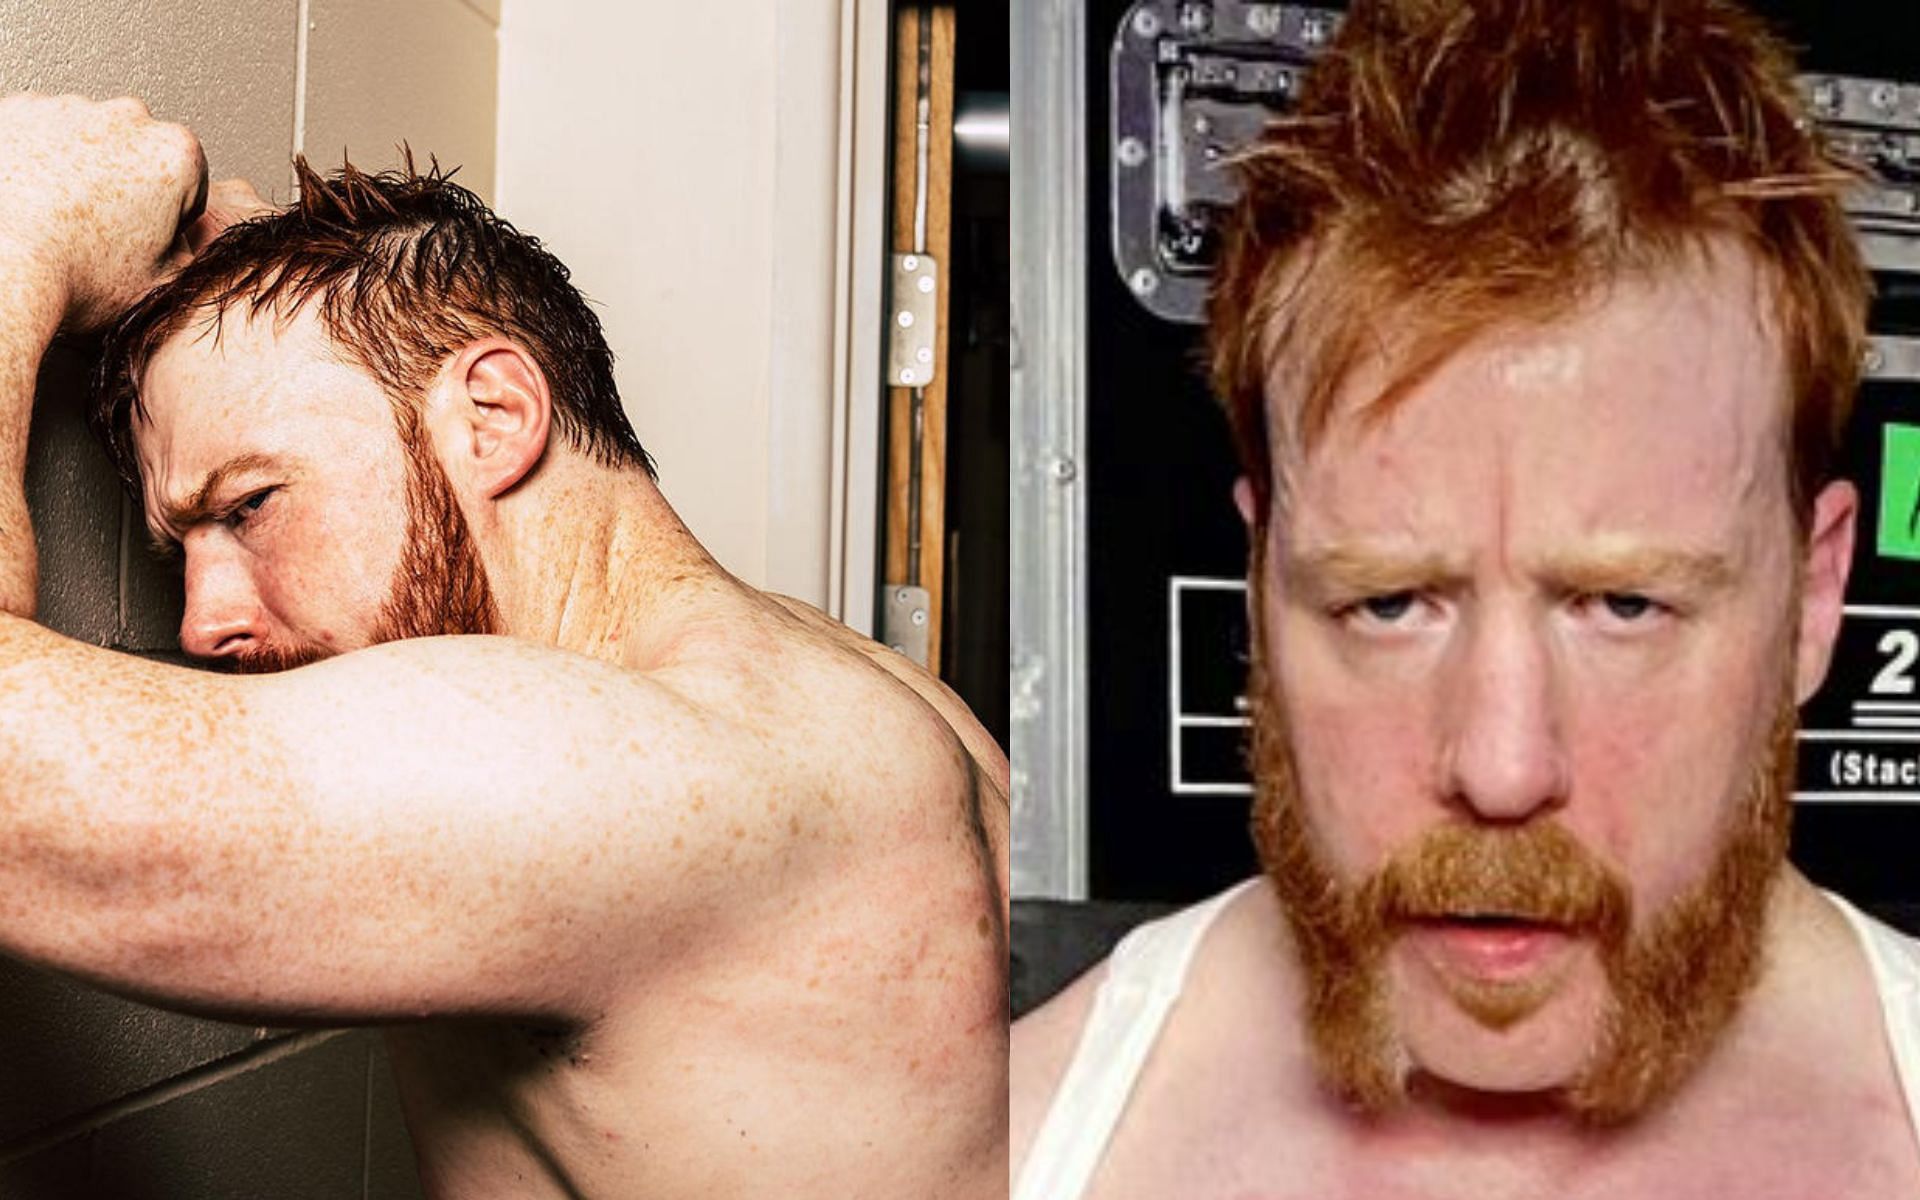 Sheamus suffered a lot during this week